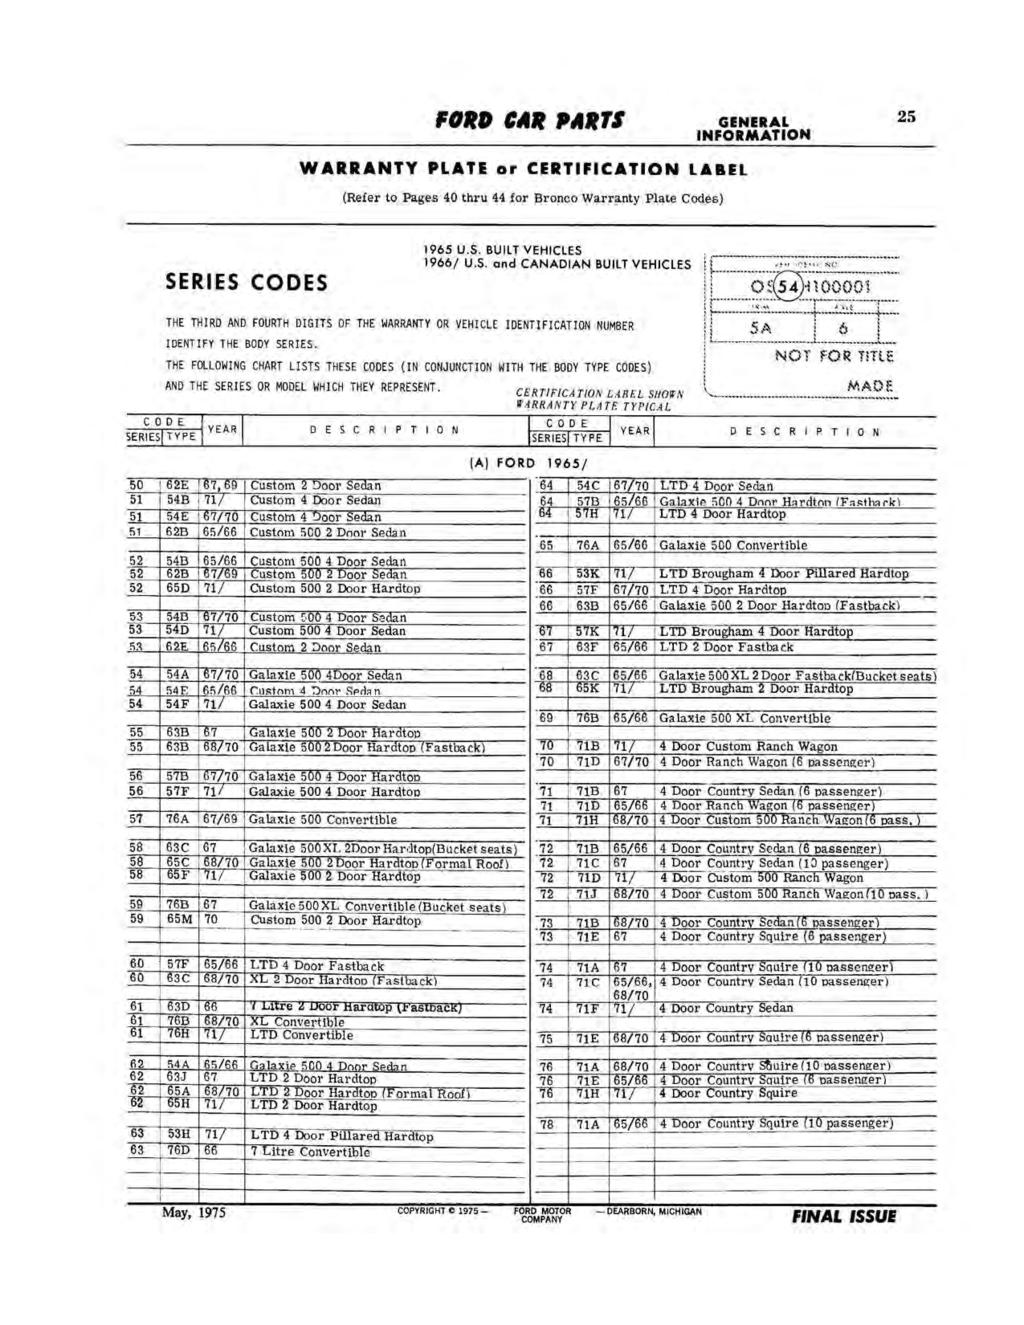 FORD CAR PARTS GENERAL INFORMATION 25 WARRANTY PLATE or CERTIFICATION LABEL (Refer to Pages 40 thru 44 for Bronco Warranty Plate Codes) SERIES CODES 1965 U.S. BUILT VEHICLES 1966/ U.S. and CANADIAN BUILT VEHICLES THE THIRD AND FOURTH DIGITS OF THE WARRANTY OR VEHICLE IDENTIFICATION NUMBER IDENTIFY THE BODY SERIES.